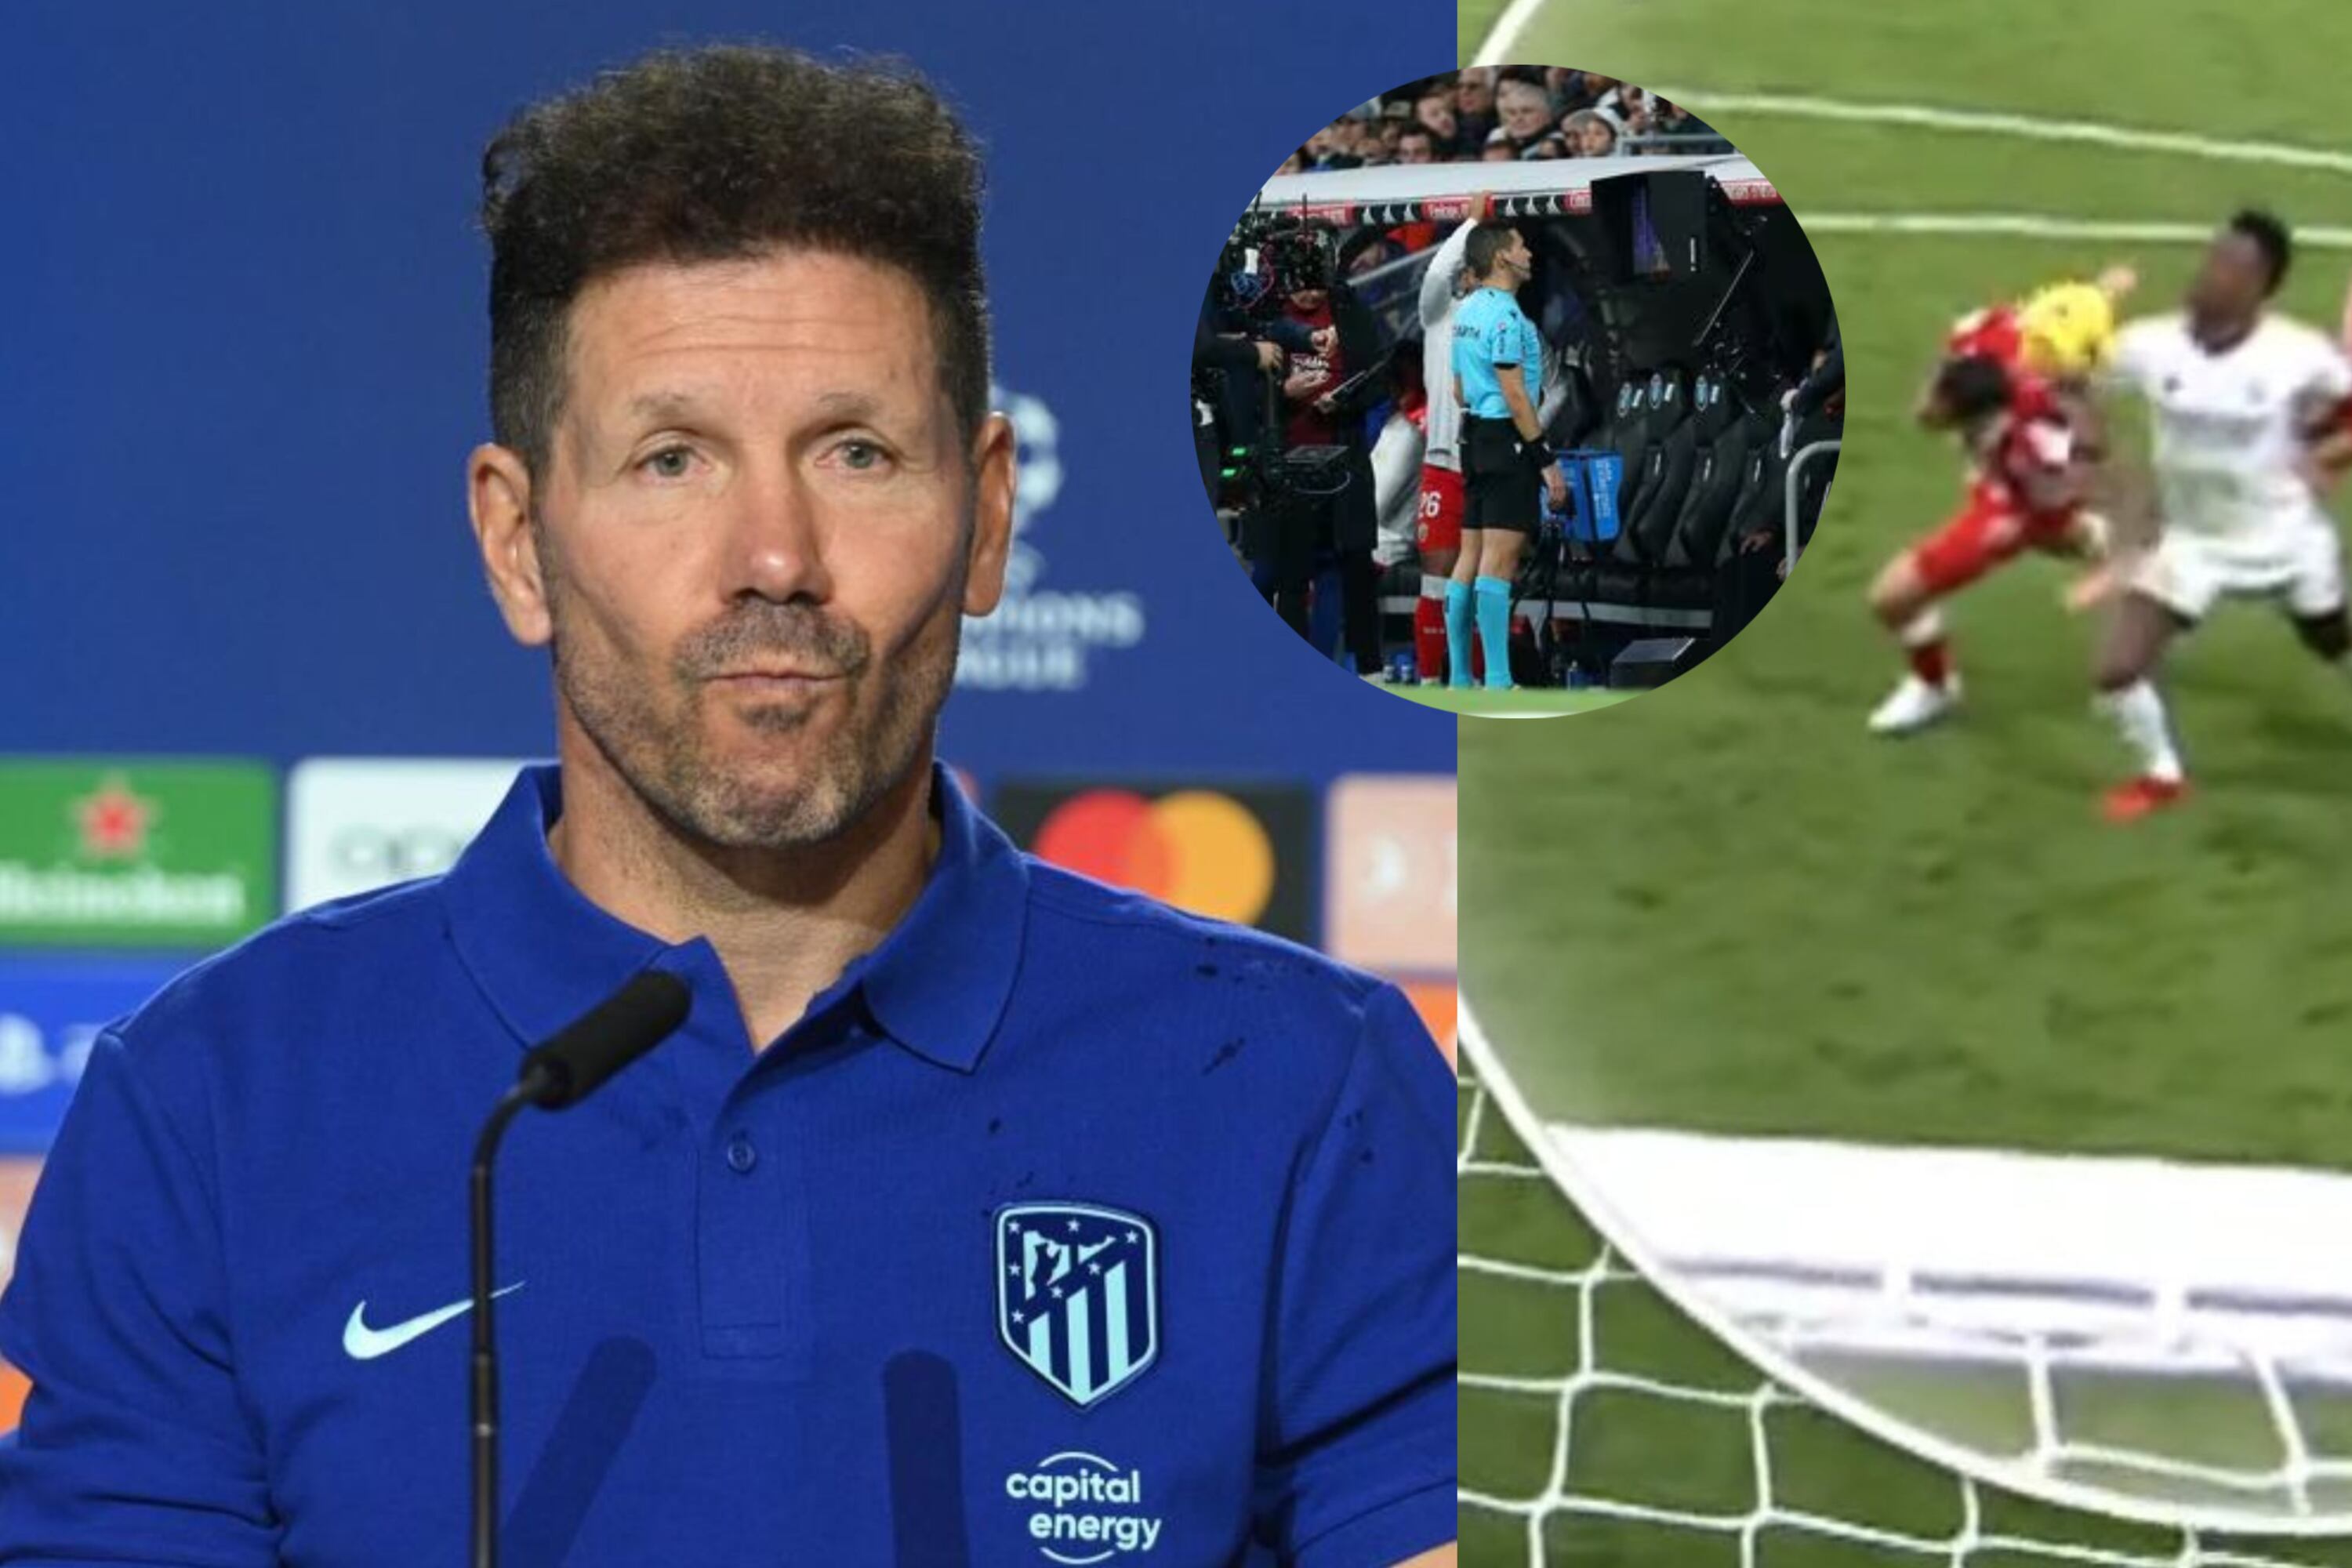 More drama! Not only Xavi, Cholo Simeone now attacks Real Madrid for referee aid